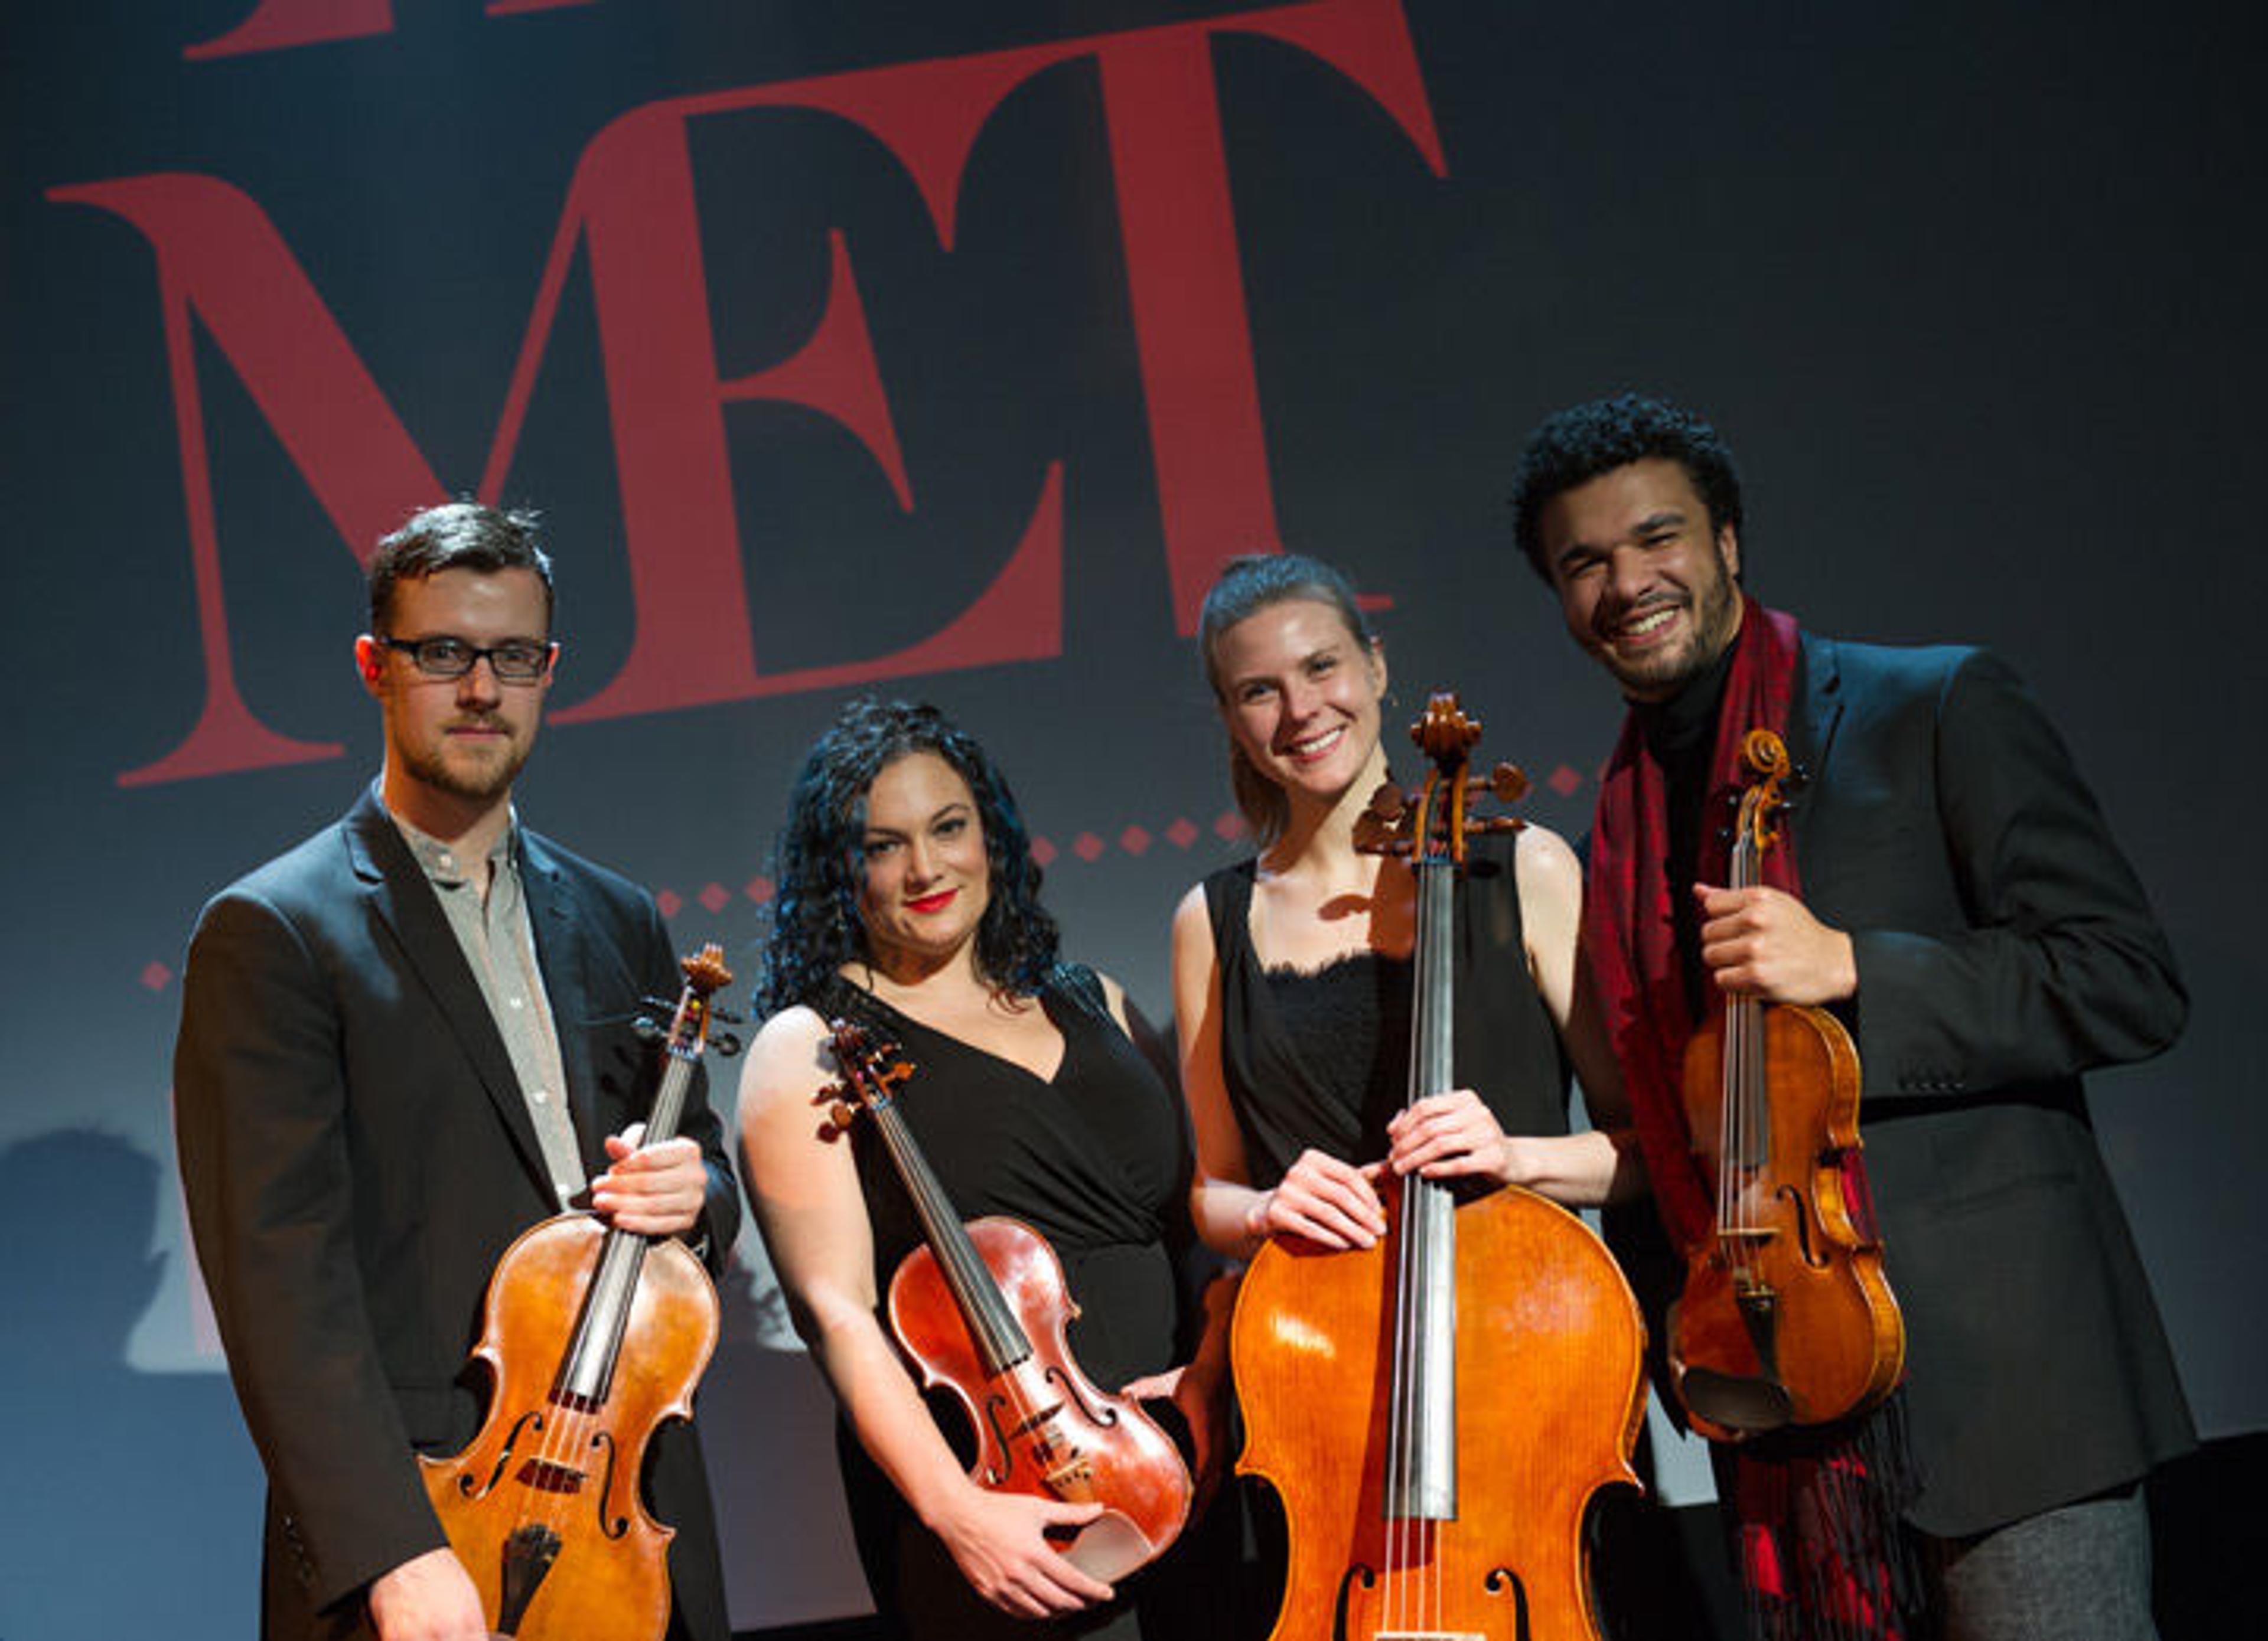 PUBLIQuartet pose in front of The Met's logo holding their instruments